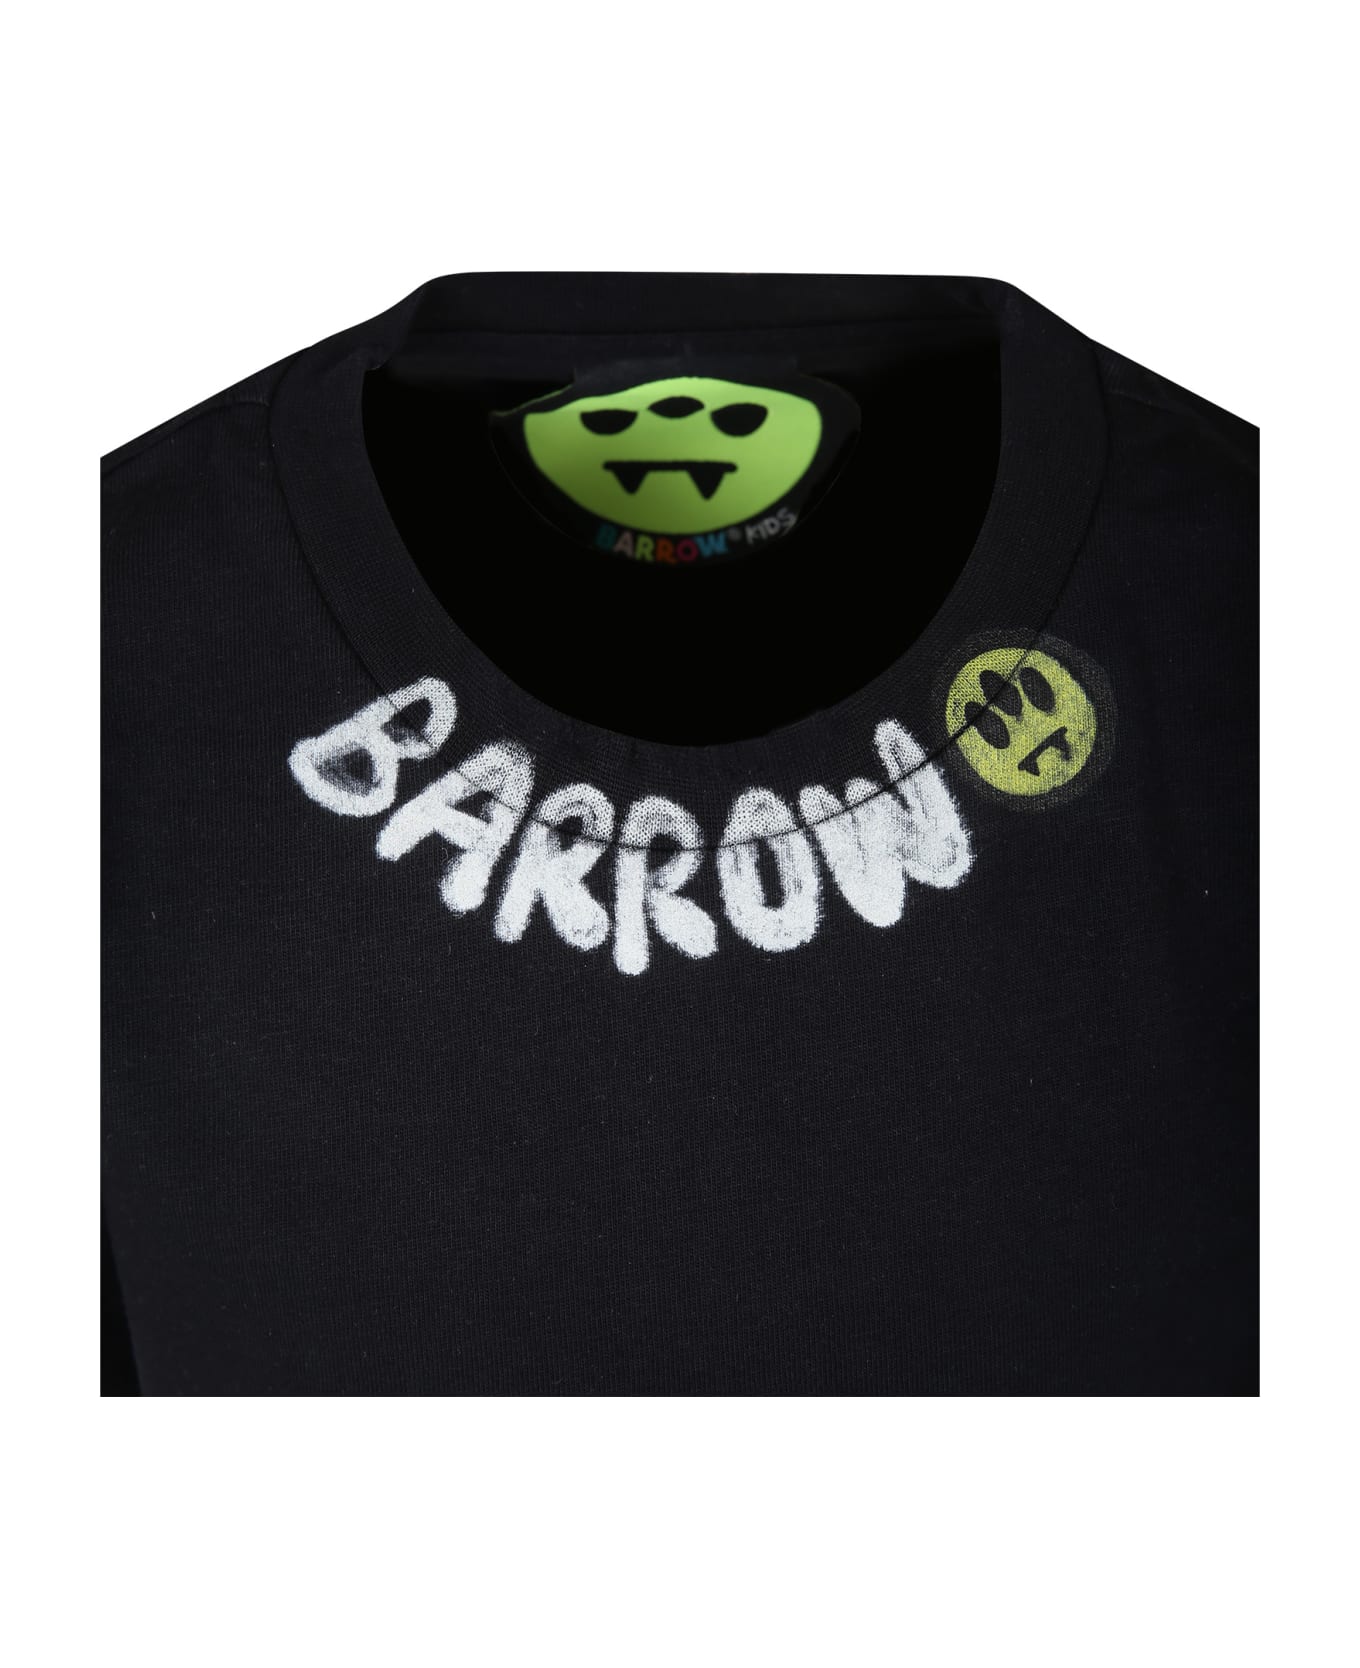 Barrow Black T-shirt For Girl With E Smile Logo - Black Tシャツ＆ポロシャツ